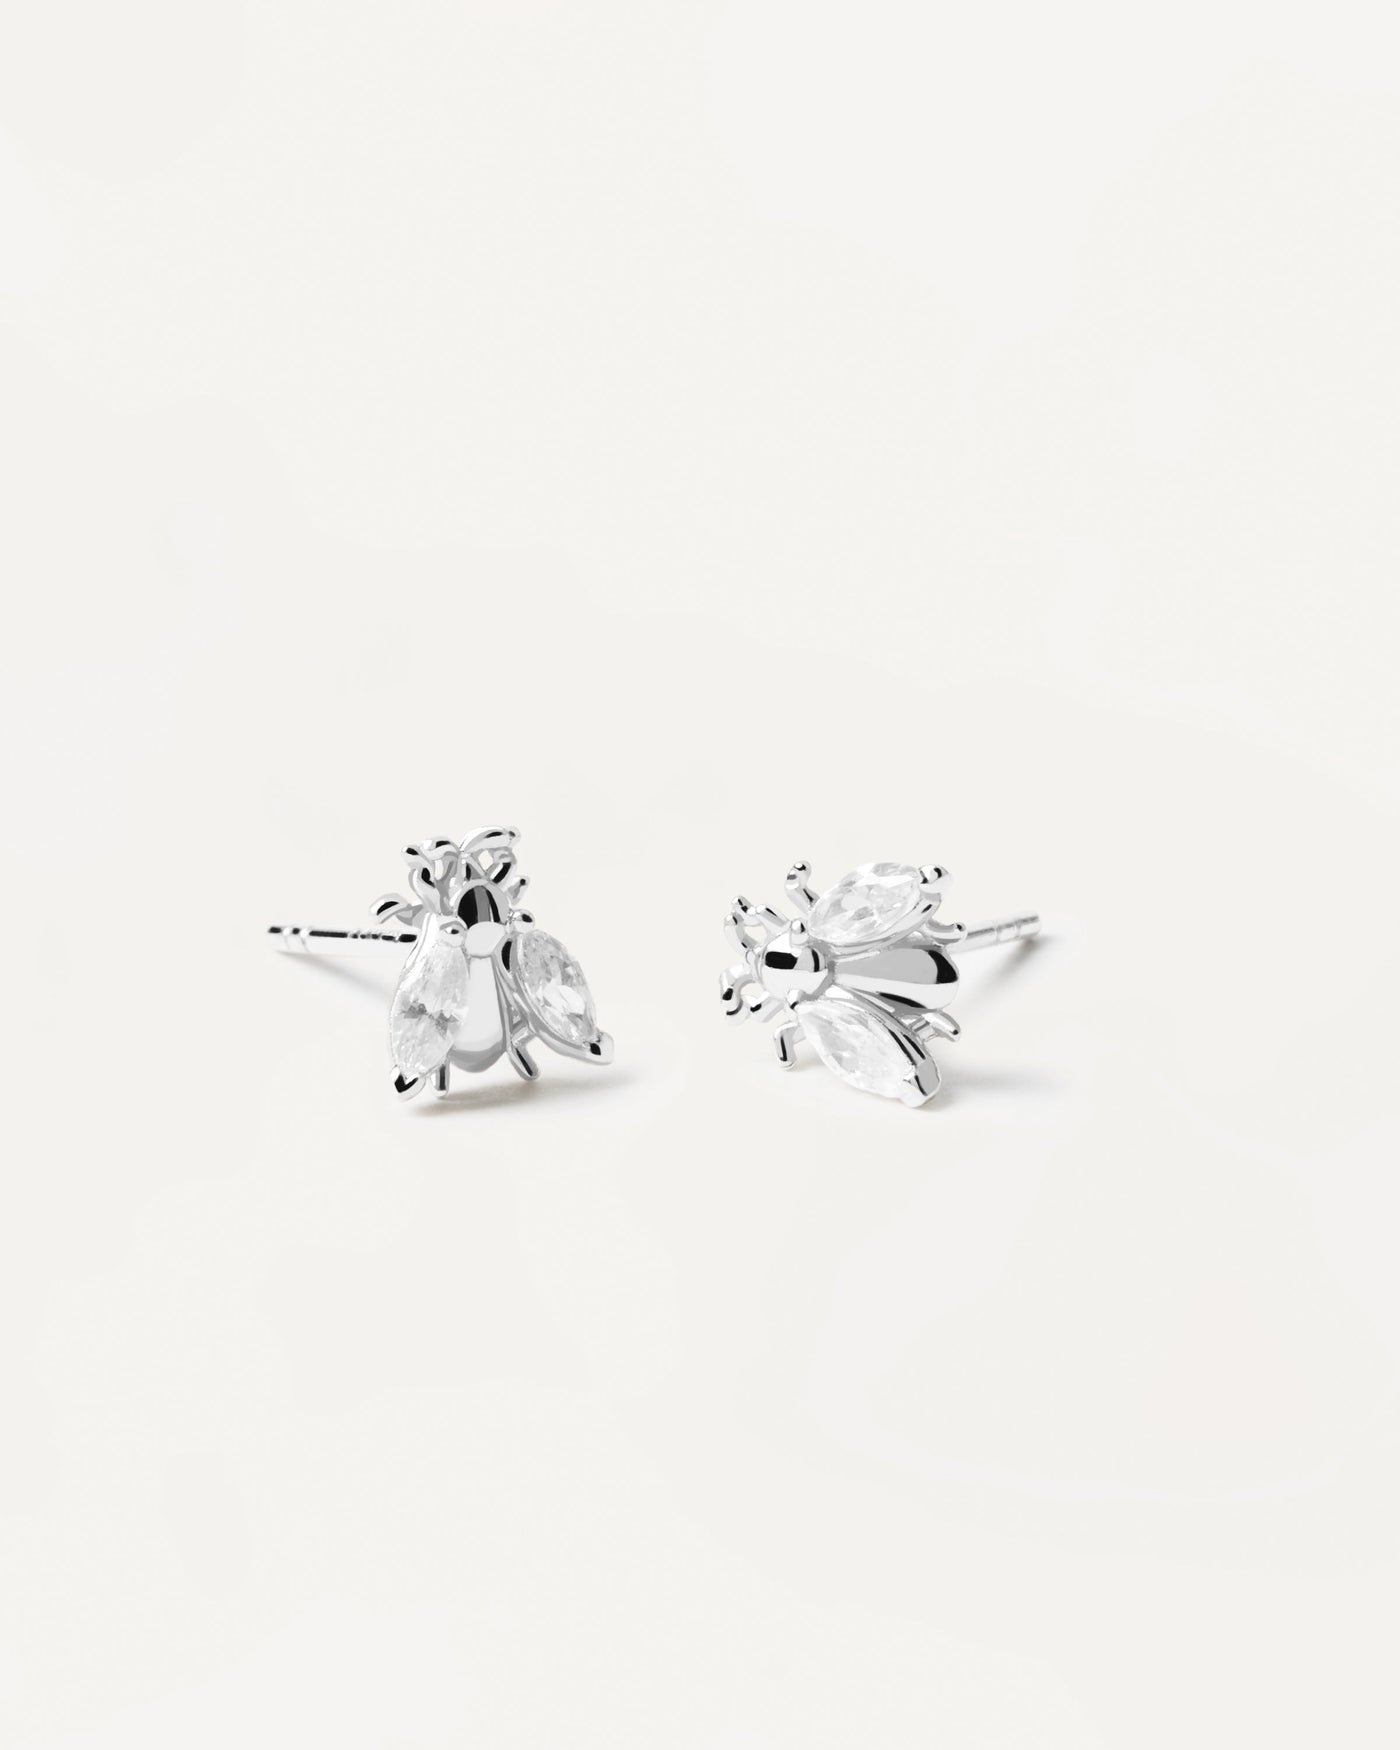 2022 Selection | Buzz Silver Earrings. Get the latest arrival from PDPAOLA. Place your order safely and get this Best Seller. Free Shipping over 40€